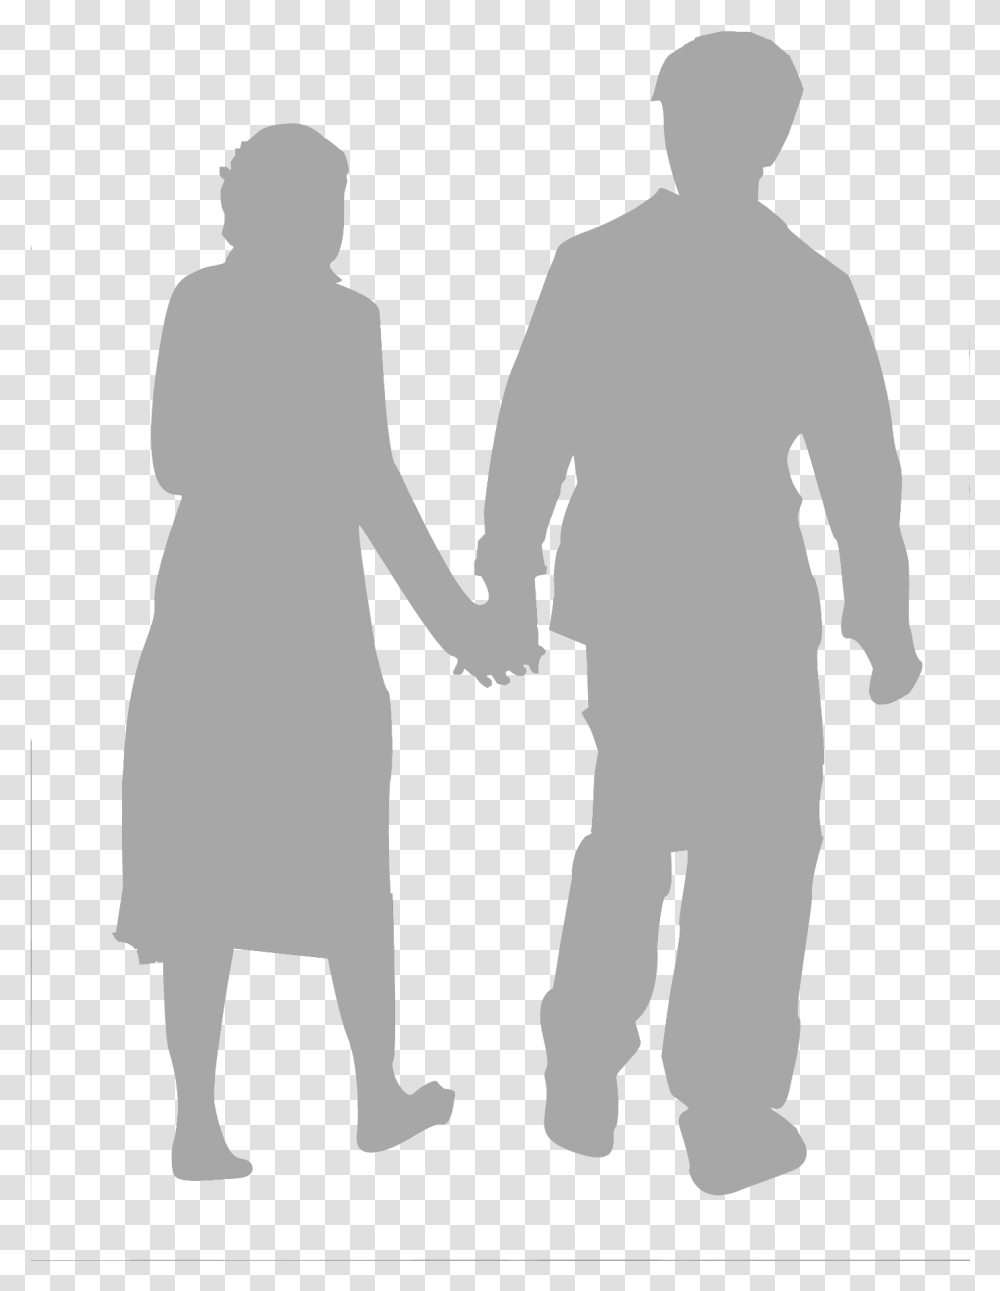 Man Walking Silhouette People Silhouette Grey, Hand, Person, Holding Hands, Family Transparent Png